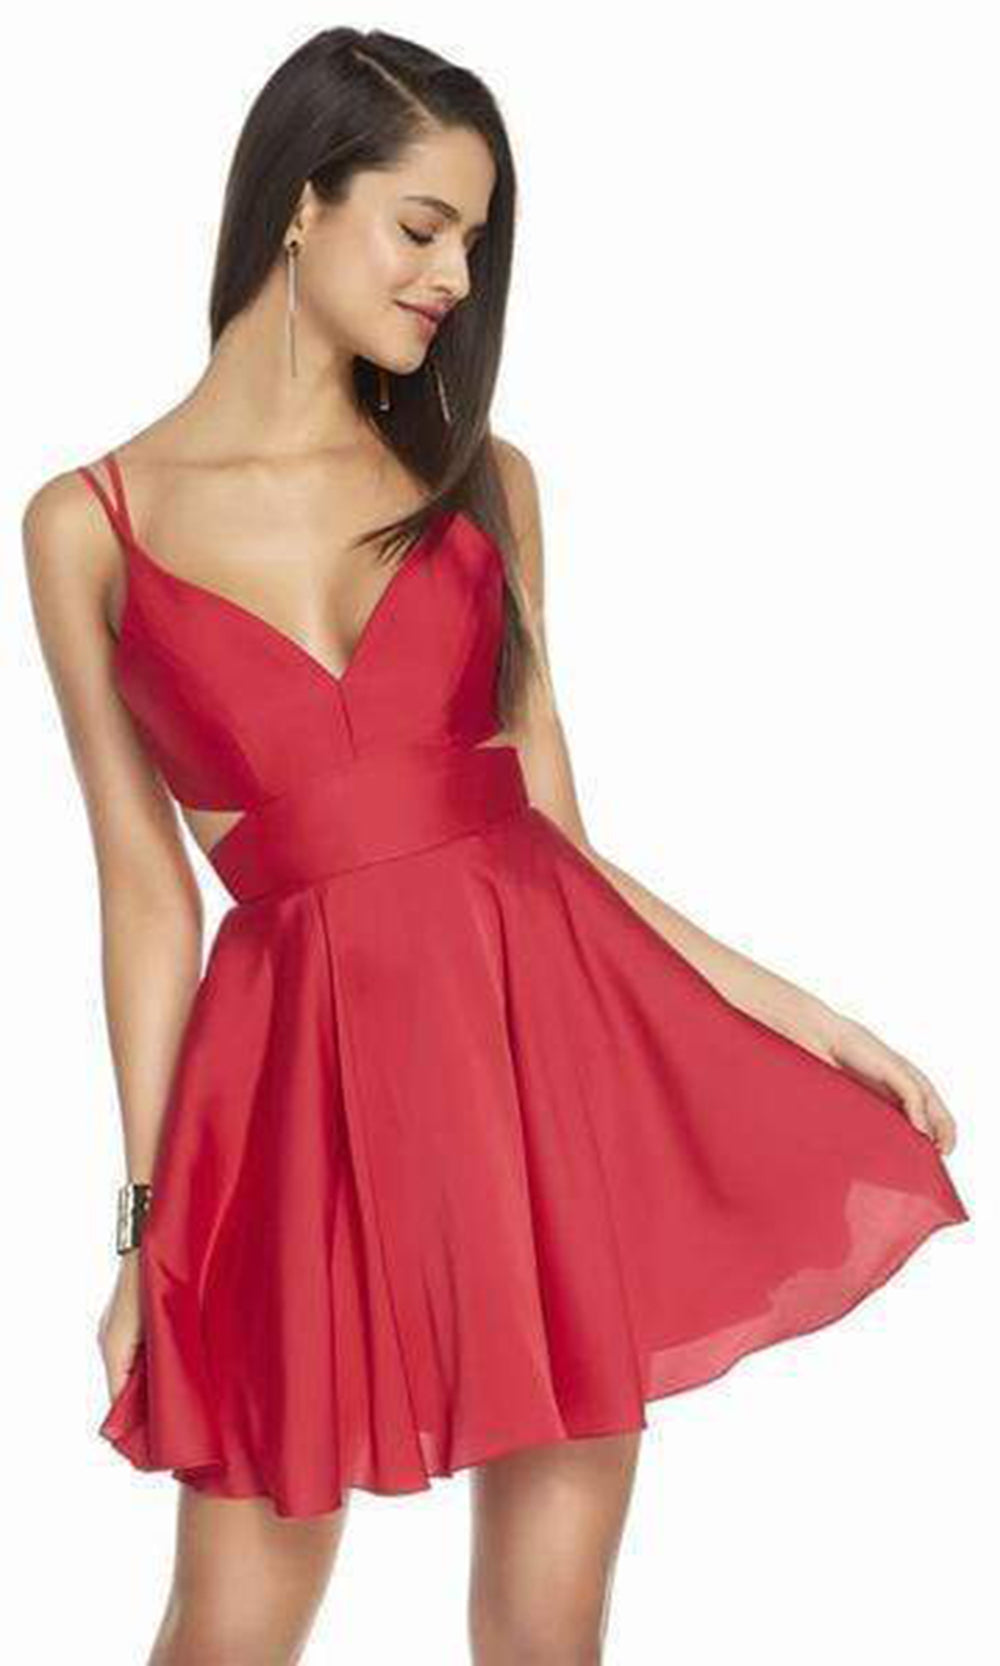 Alyce Paris - 4117 Bandeau Back V Neck Satin Chiffon Cocktail Dress - 1 pc Red In Size 0 Available CCSALE 0 / Red